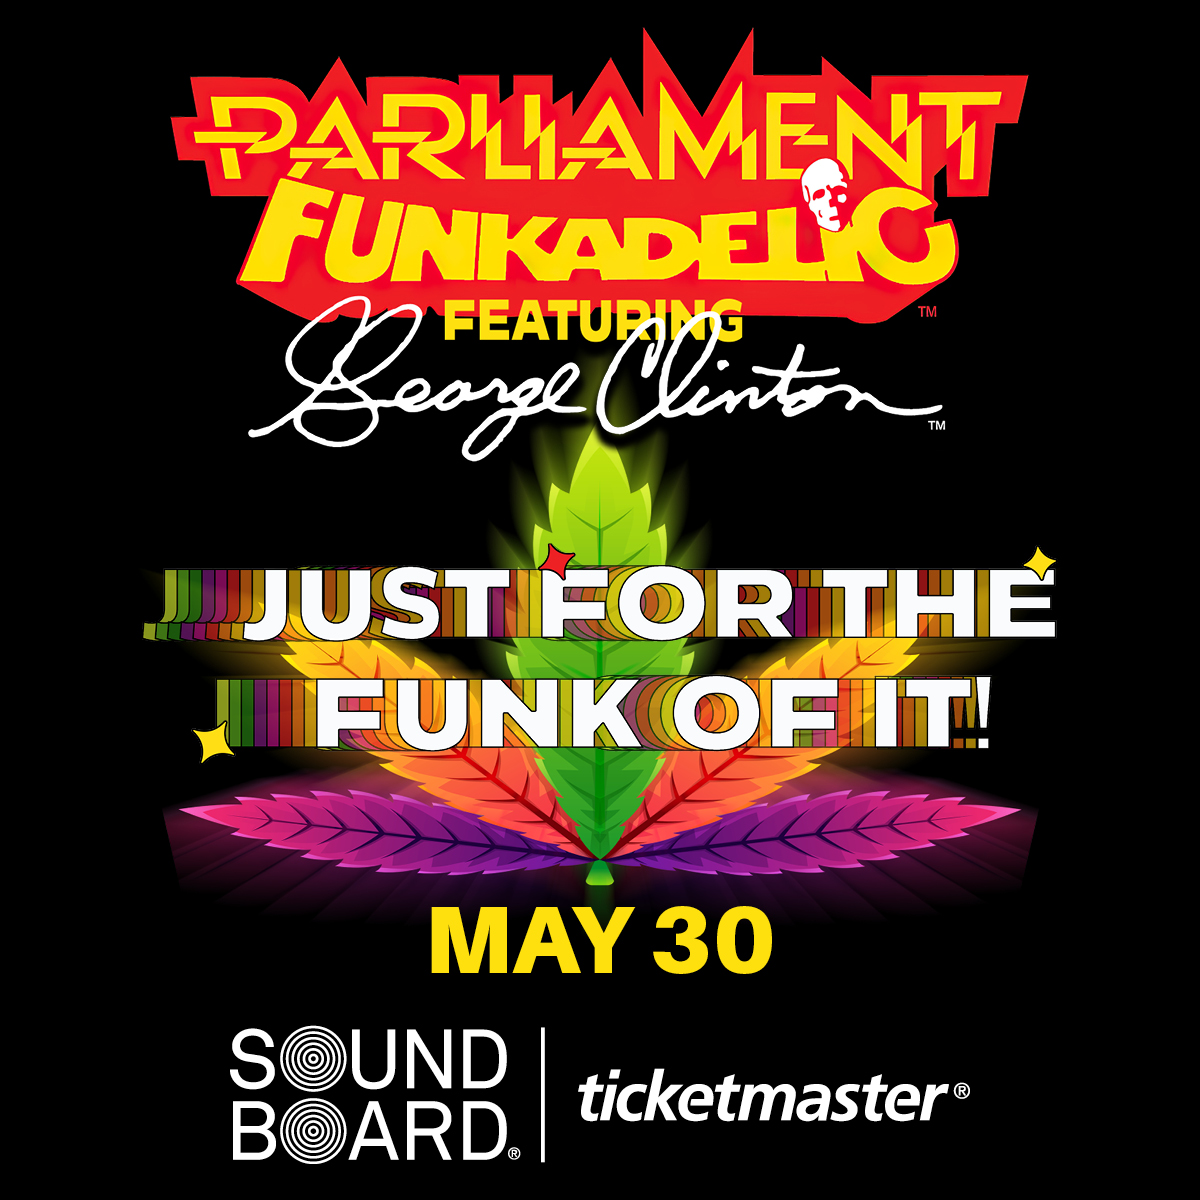 Catch Parliament Funkadelic featuring George Clinton, Just For The Funk of It at Sound Board May 30! 🚀 Grab your tickets now! 🎫👉 playm.cc/3TKG2Kq